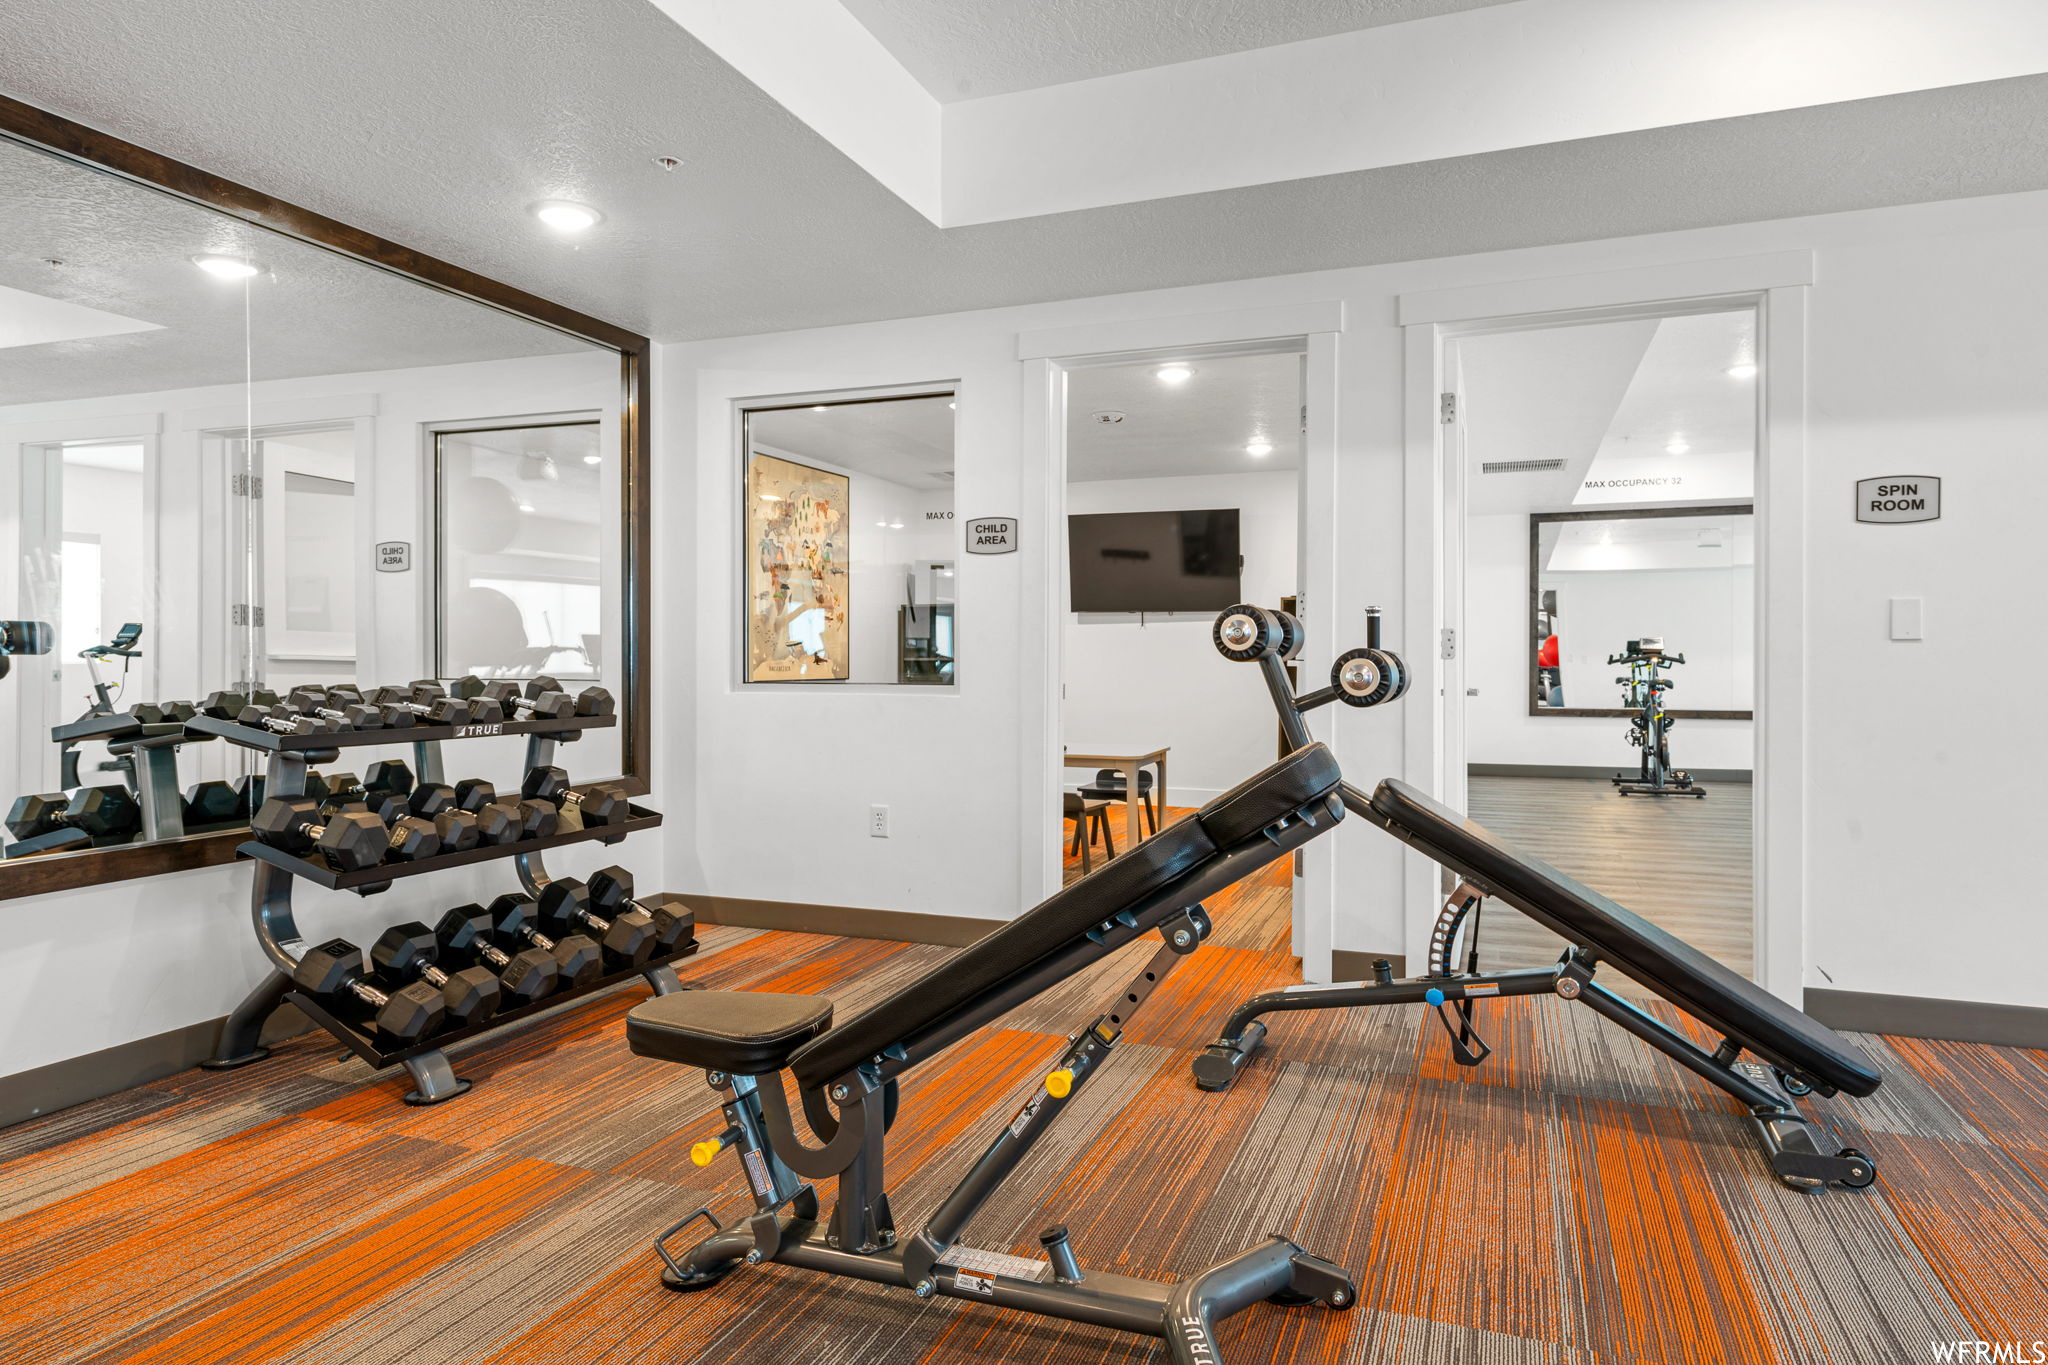 Workout area with a textured ceiling and light hardwood floors